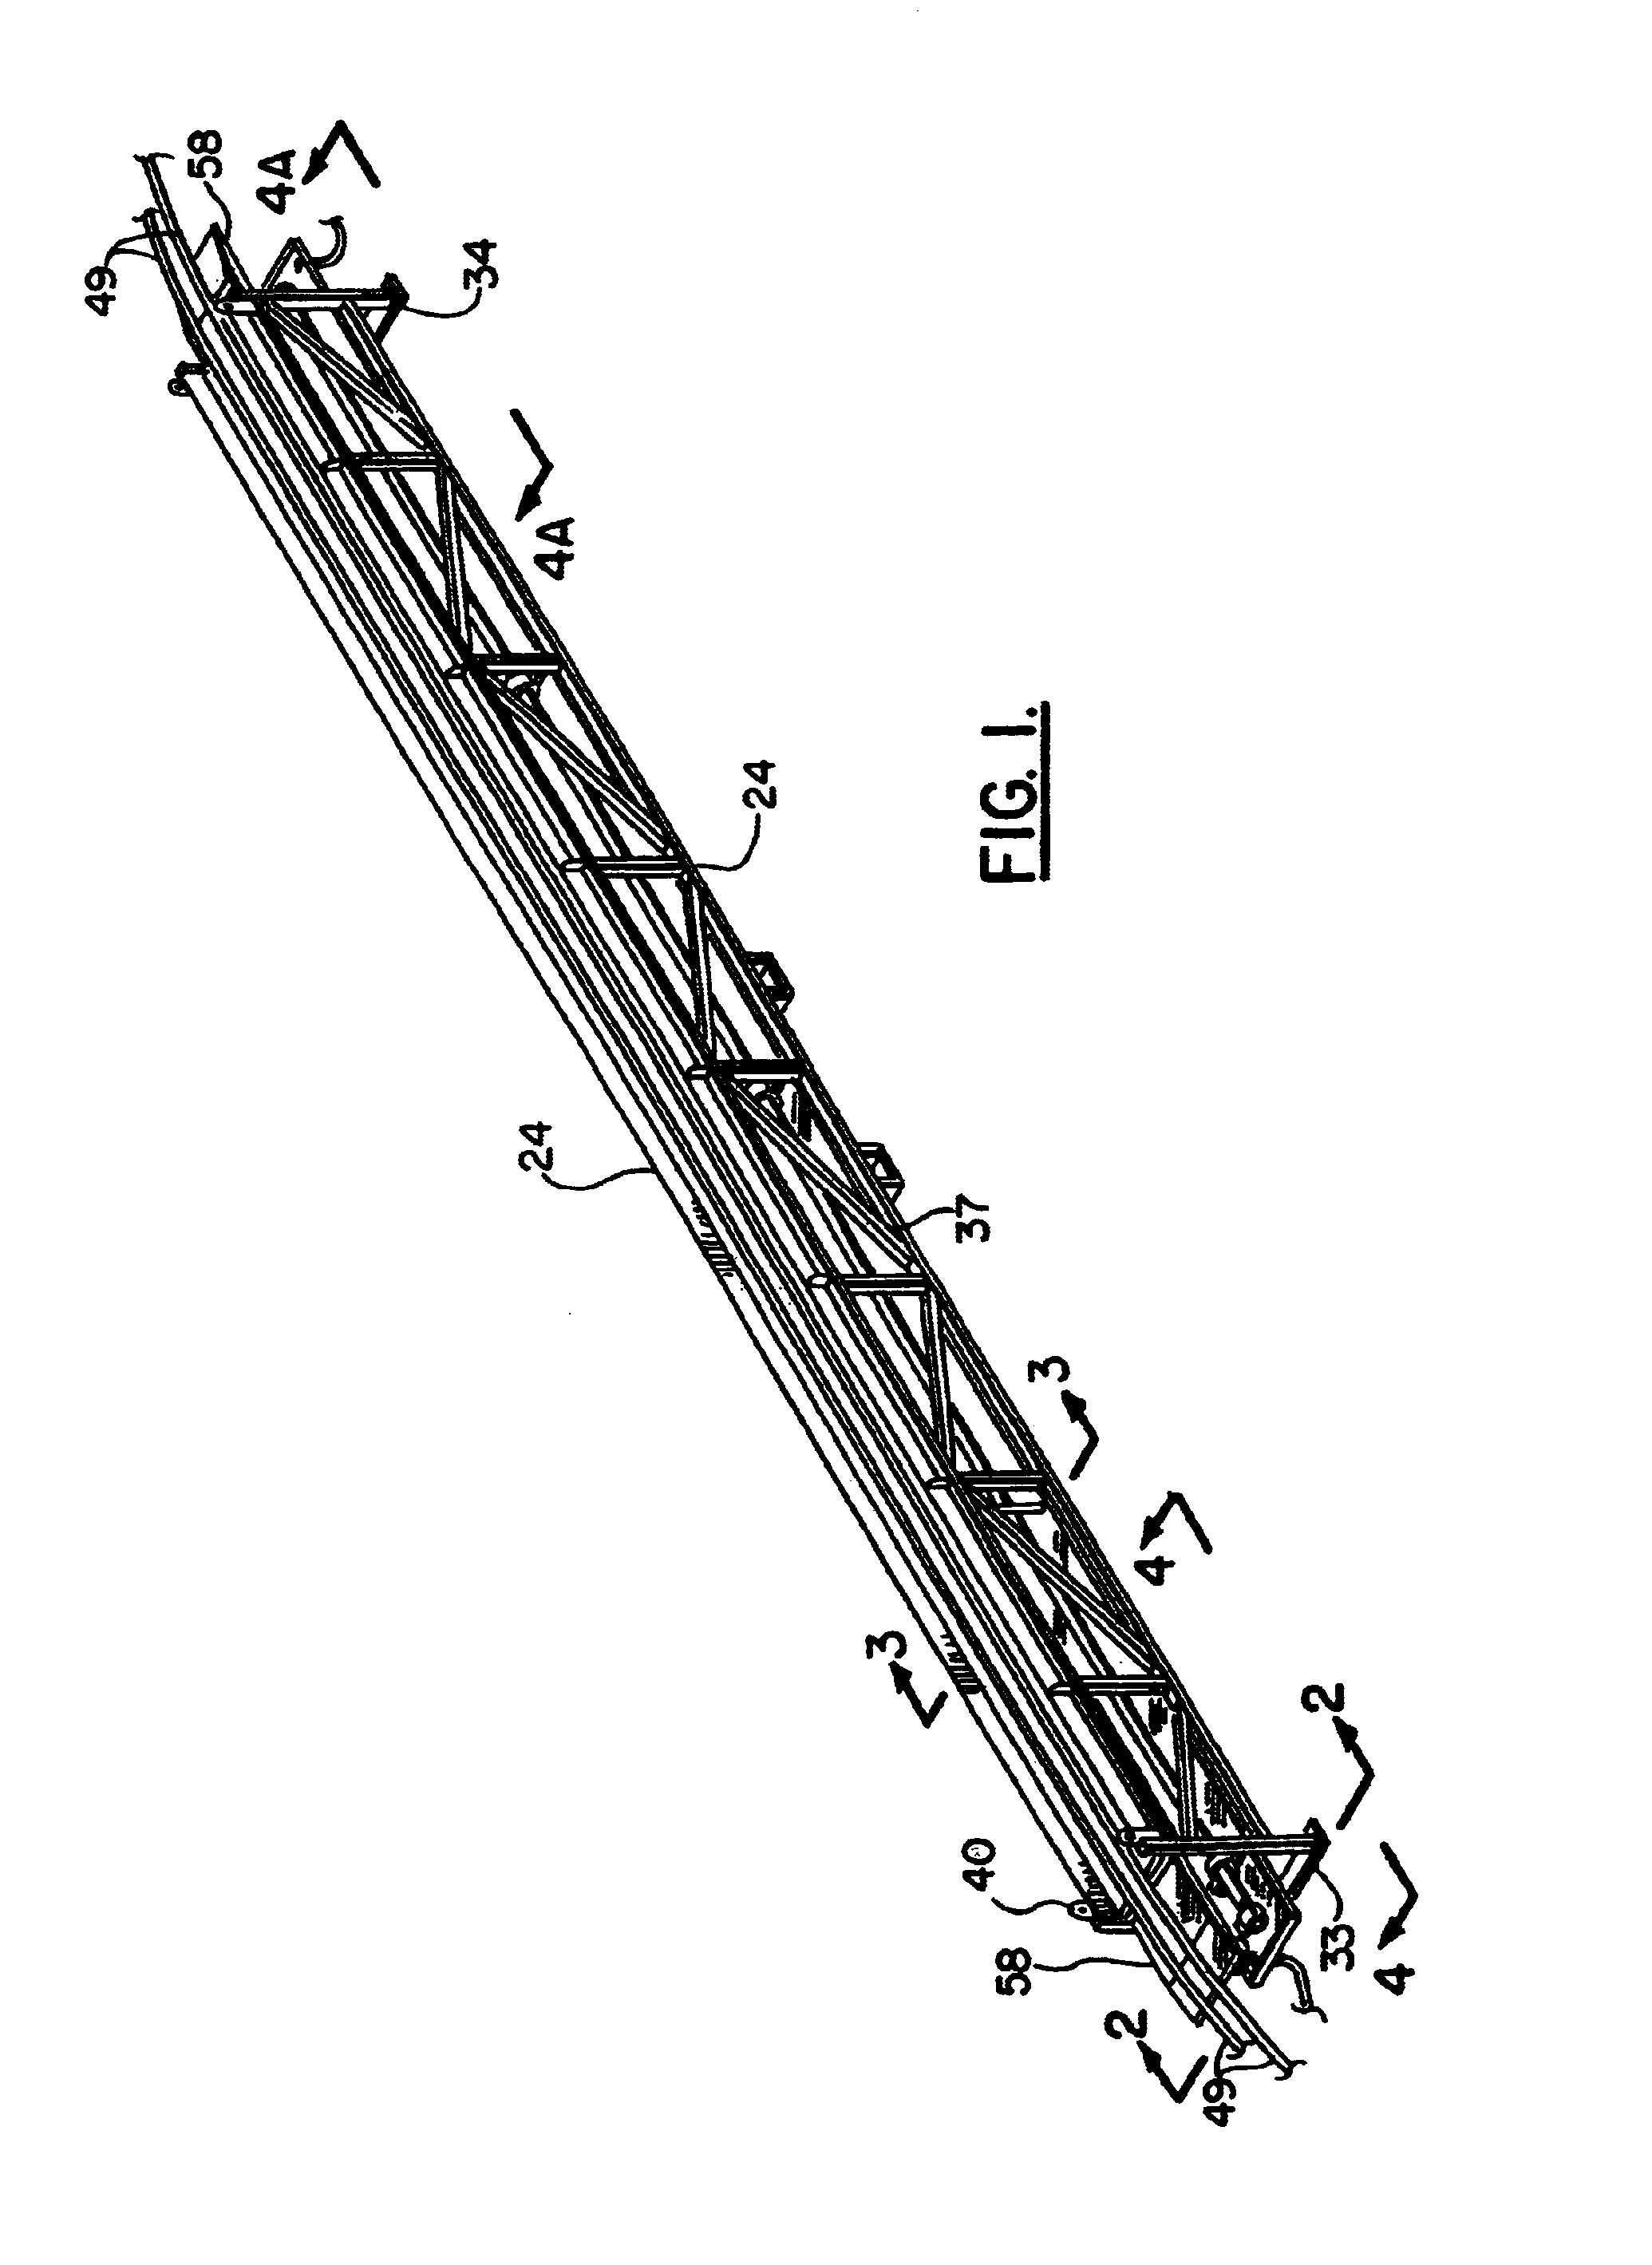 Method and apparatus for providing fluid transfer between a marine platform and a service vessel